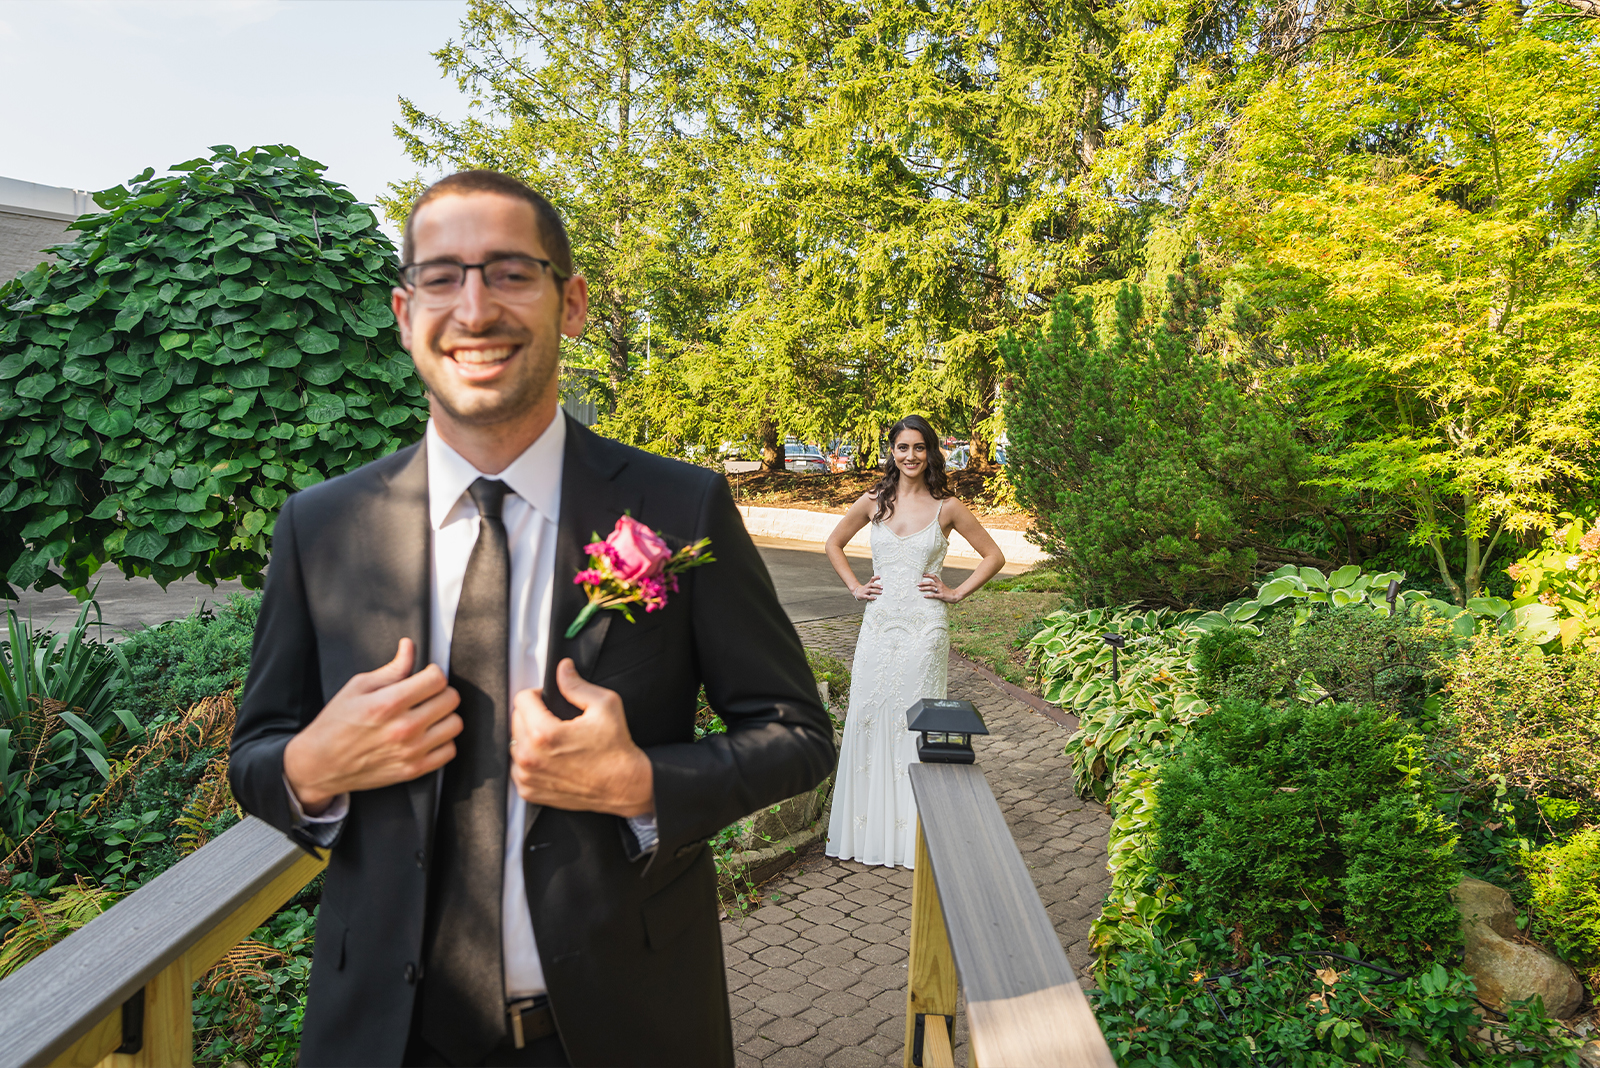 Bride and groom first look, smile, green, nature, bridge, trees, classy wedding ceremony at Landerhaven, Mayfield Heights OH